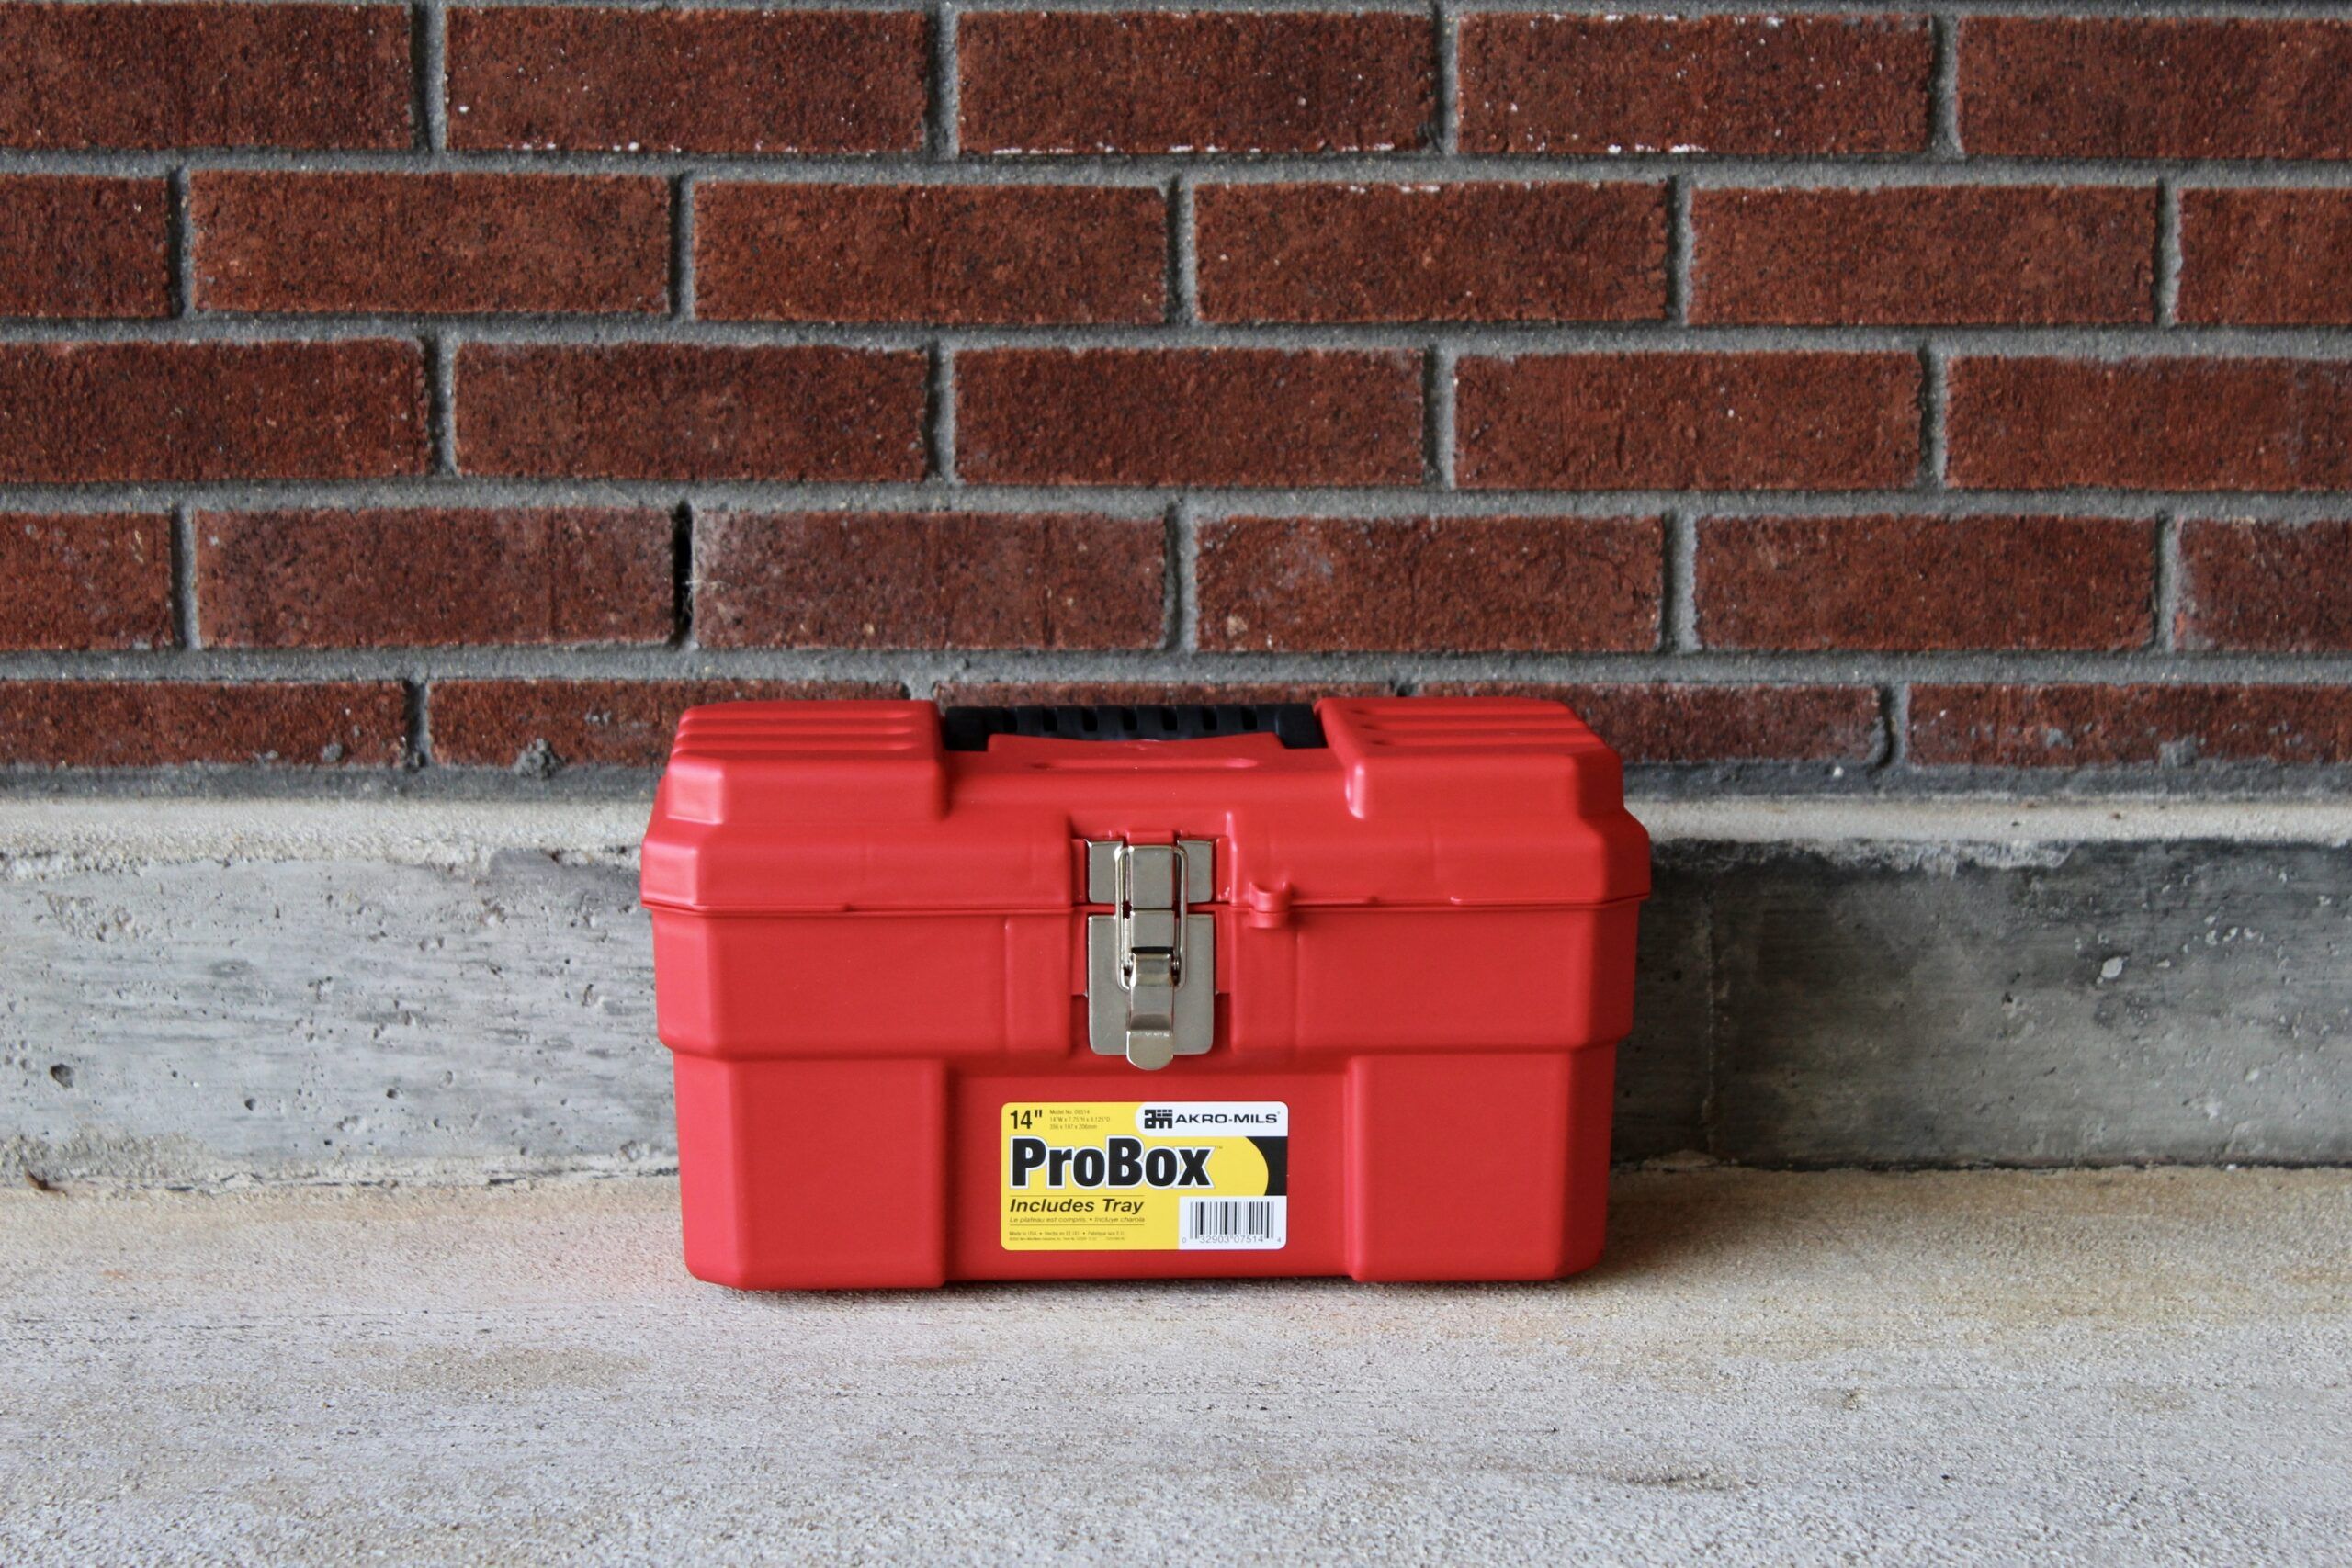 Portable Plastic Hardware Toolbox Household Small Size